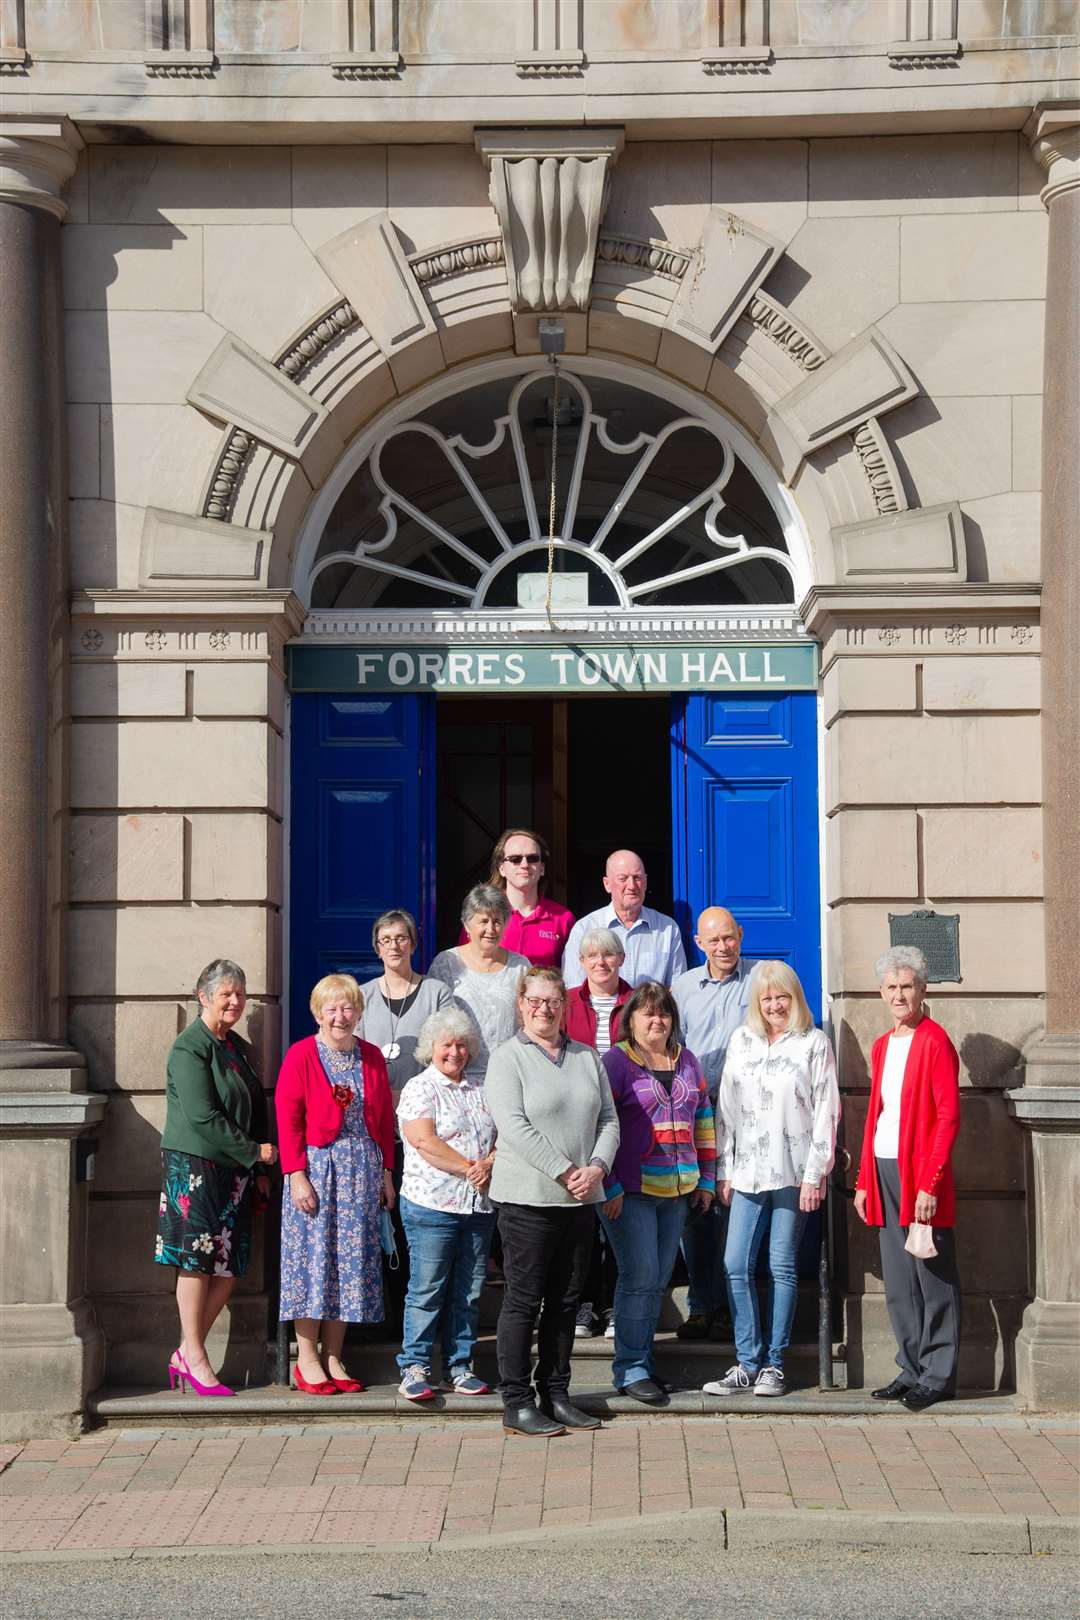 Members of Forres Area Community Trust, including Debbie Herron (front) are joined by other hall users as the venue reopens following the pandemic close down.